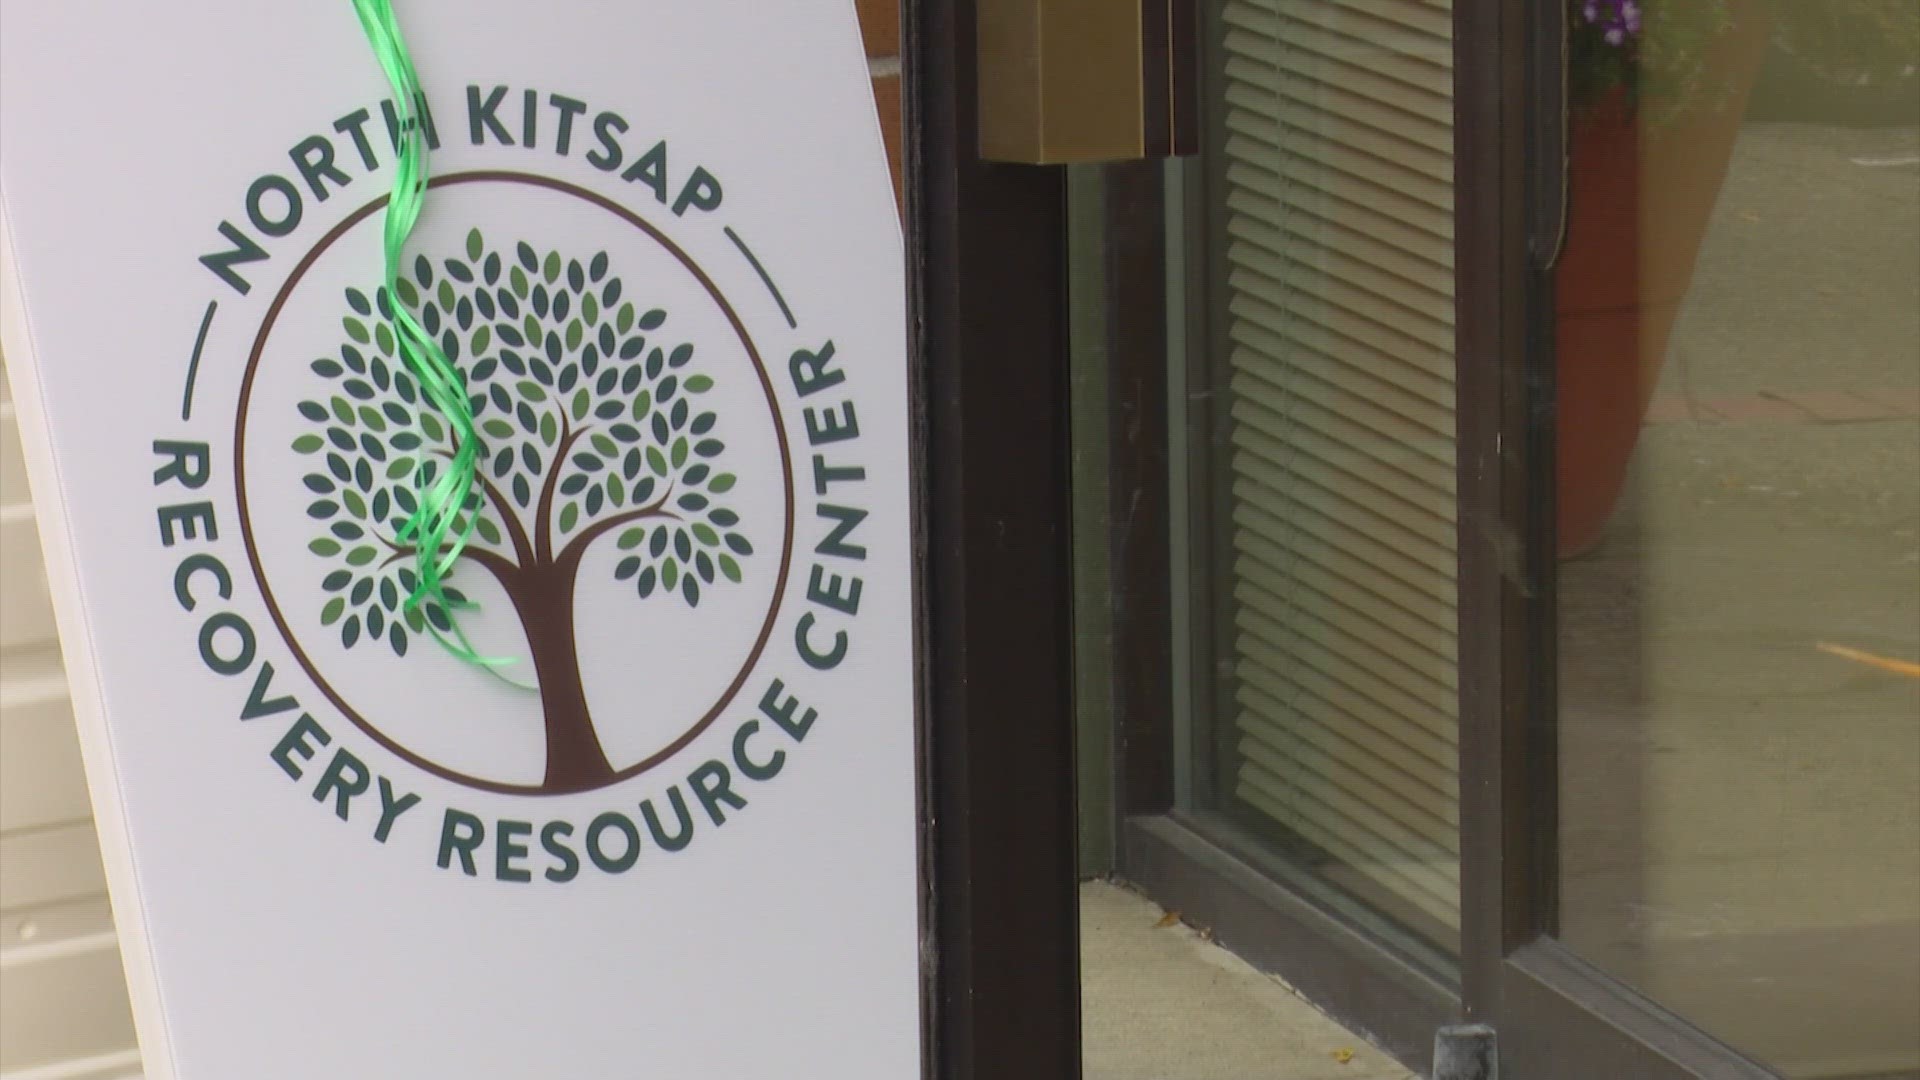 The North Kitsap Recovery Resource Center will provide free recovery services to people living in the area. It was created in response to a rise in overdoses.